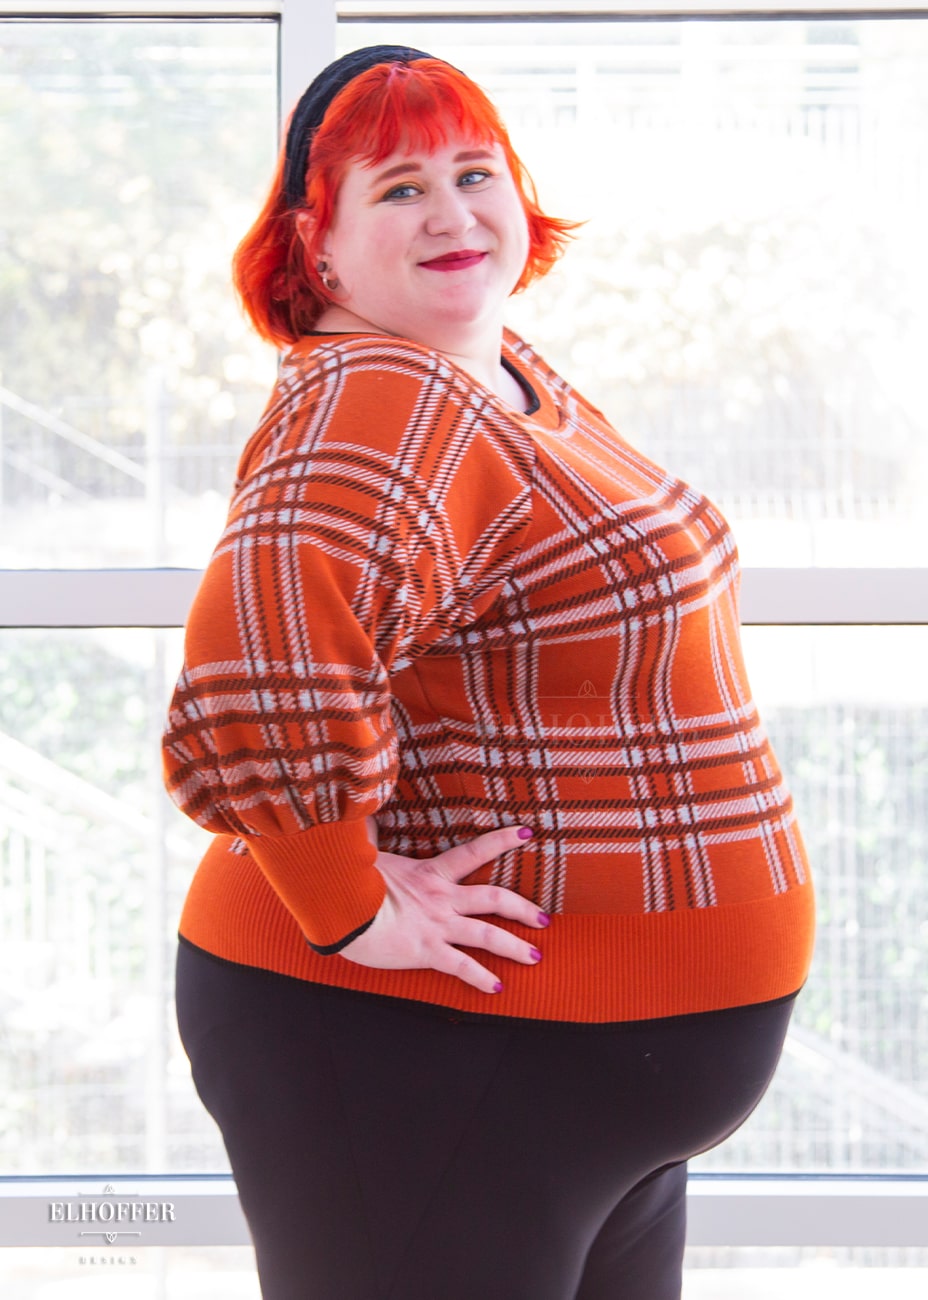 Logan, a fair skinned 3XL model with short bright orange hair and bangs, is wearing a cropped boatneck sweater with half length bishop sleeve in an orange, white, and black tartan.